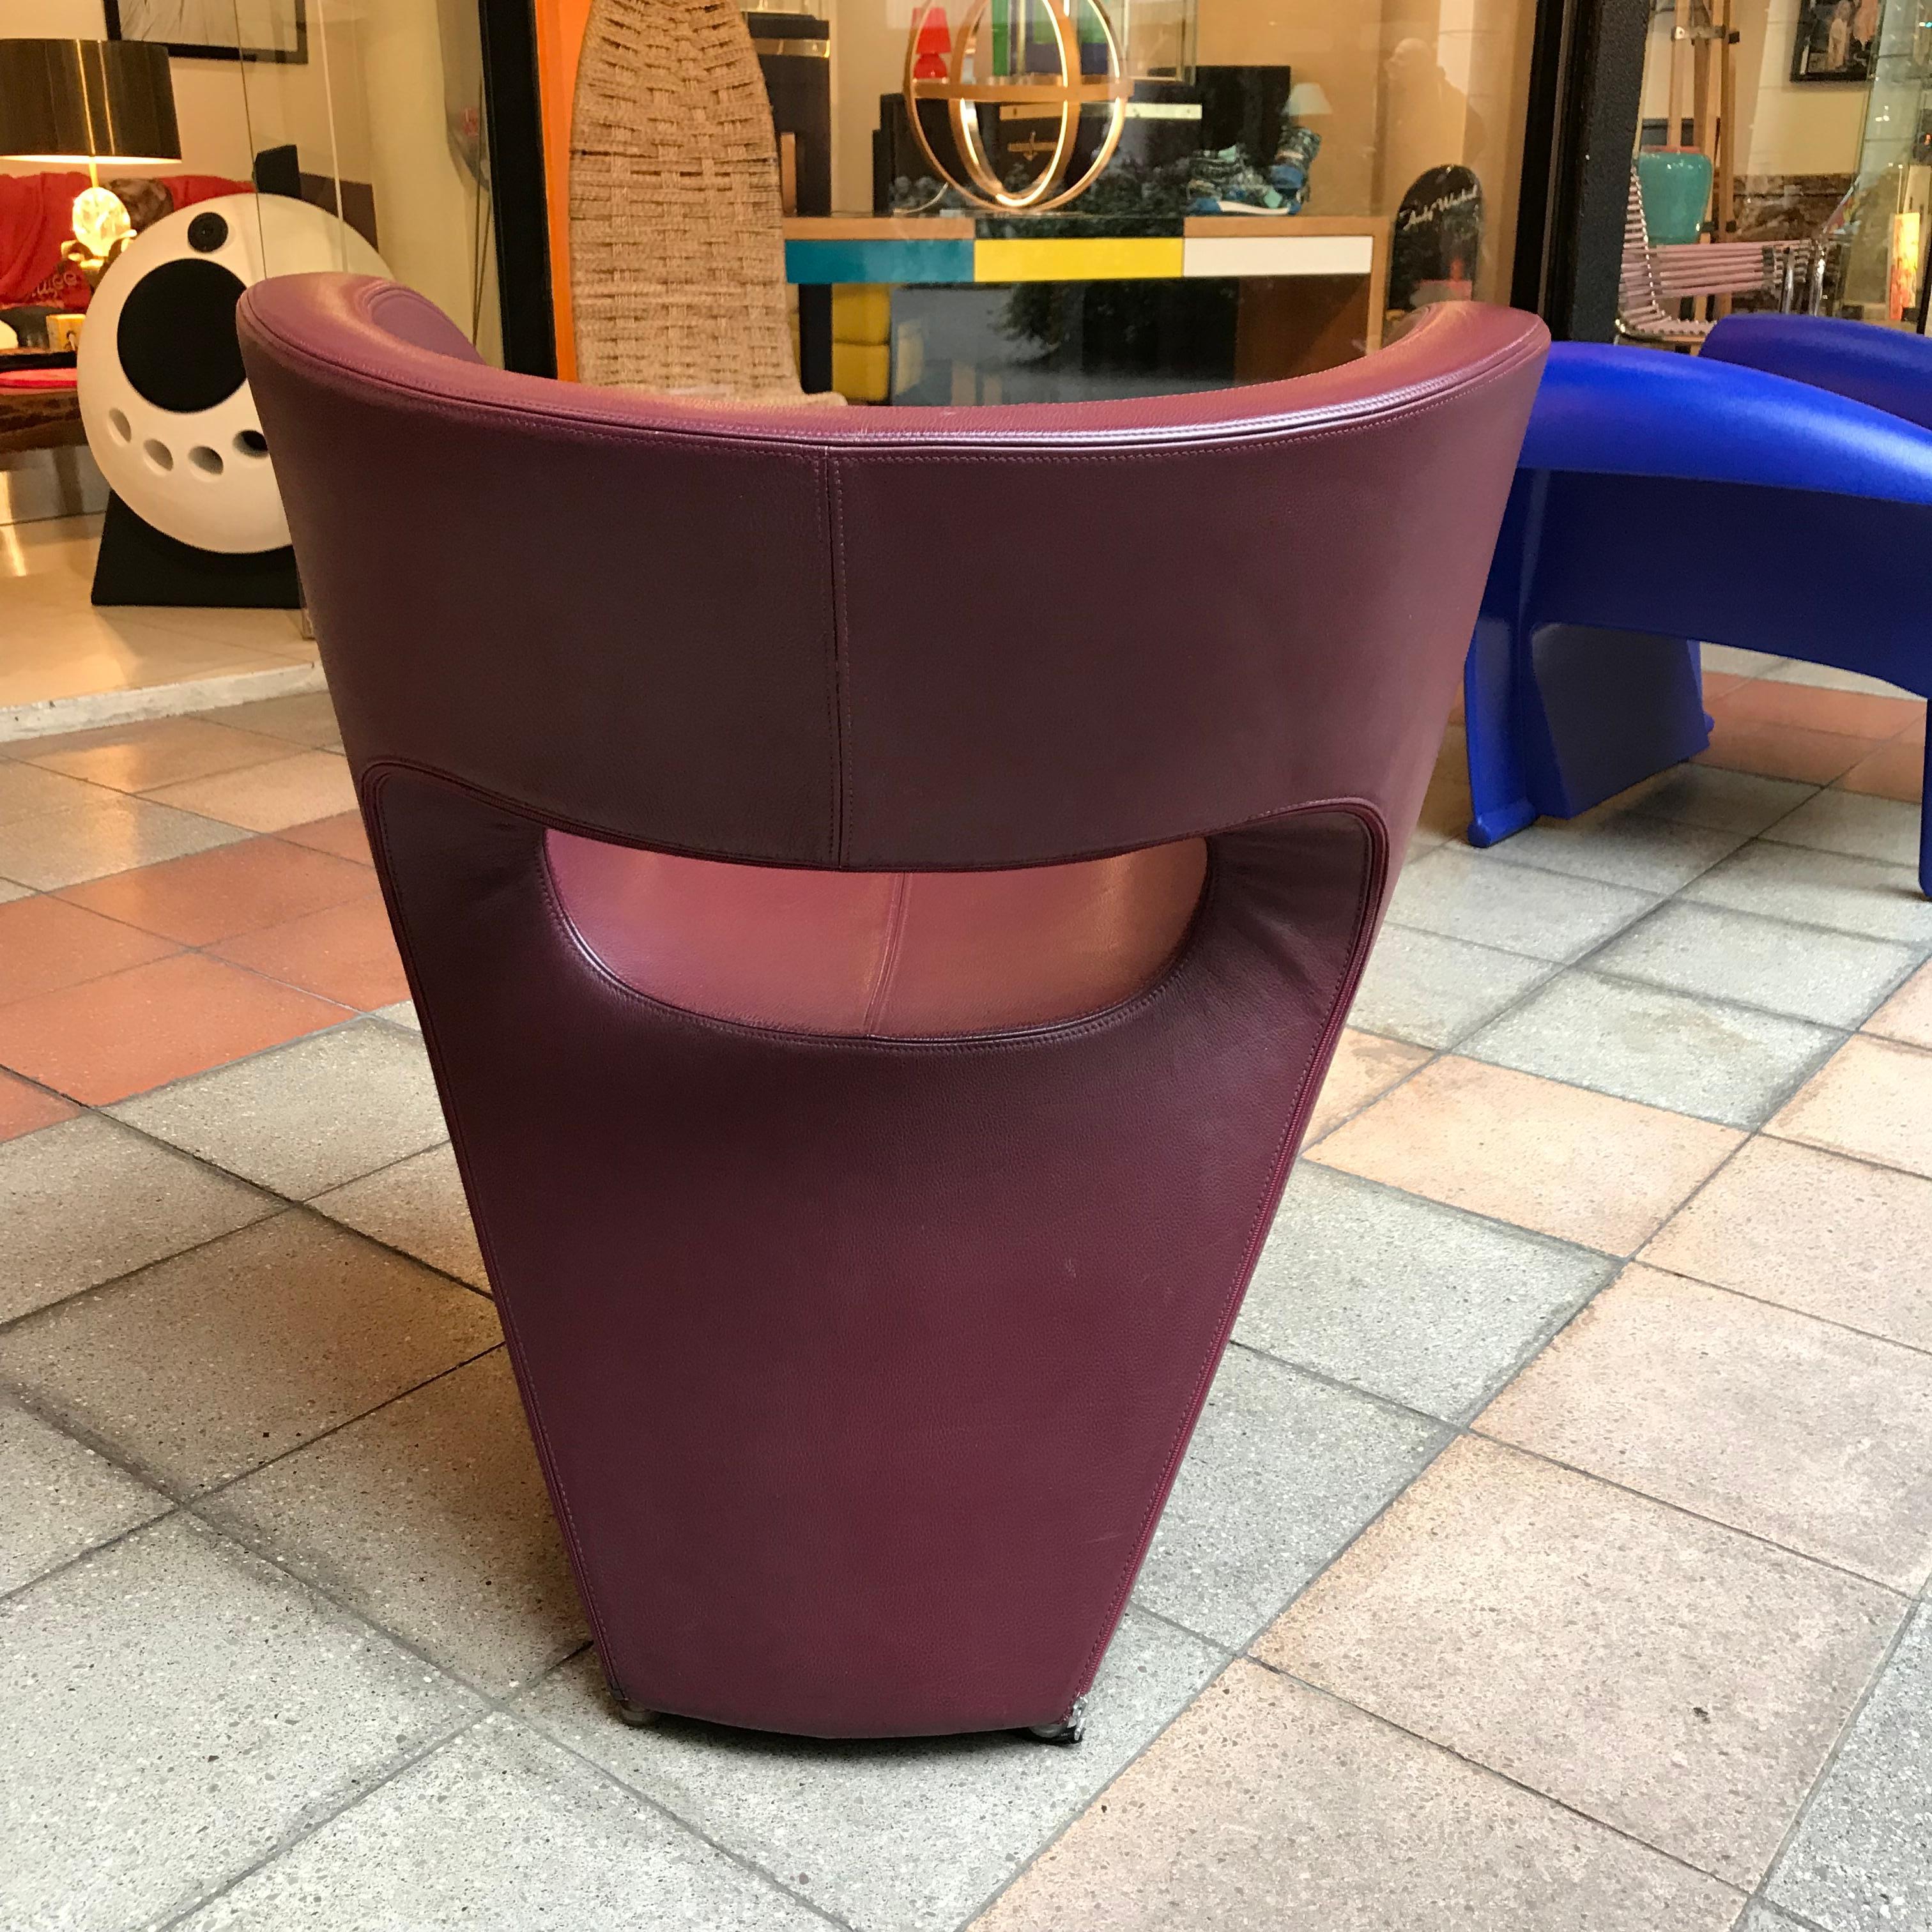 Beautiful Victoria chair
By designer Ron Arad
Edited by Moroso,
circa 2002.
Very nice version in burgundy/purple leather with removable cover
Measures: H 77 x W 74 x D 65
In a perfect condition

2200 Euros one

2 available

The Victoria